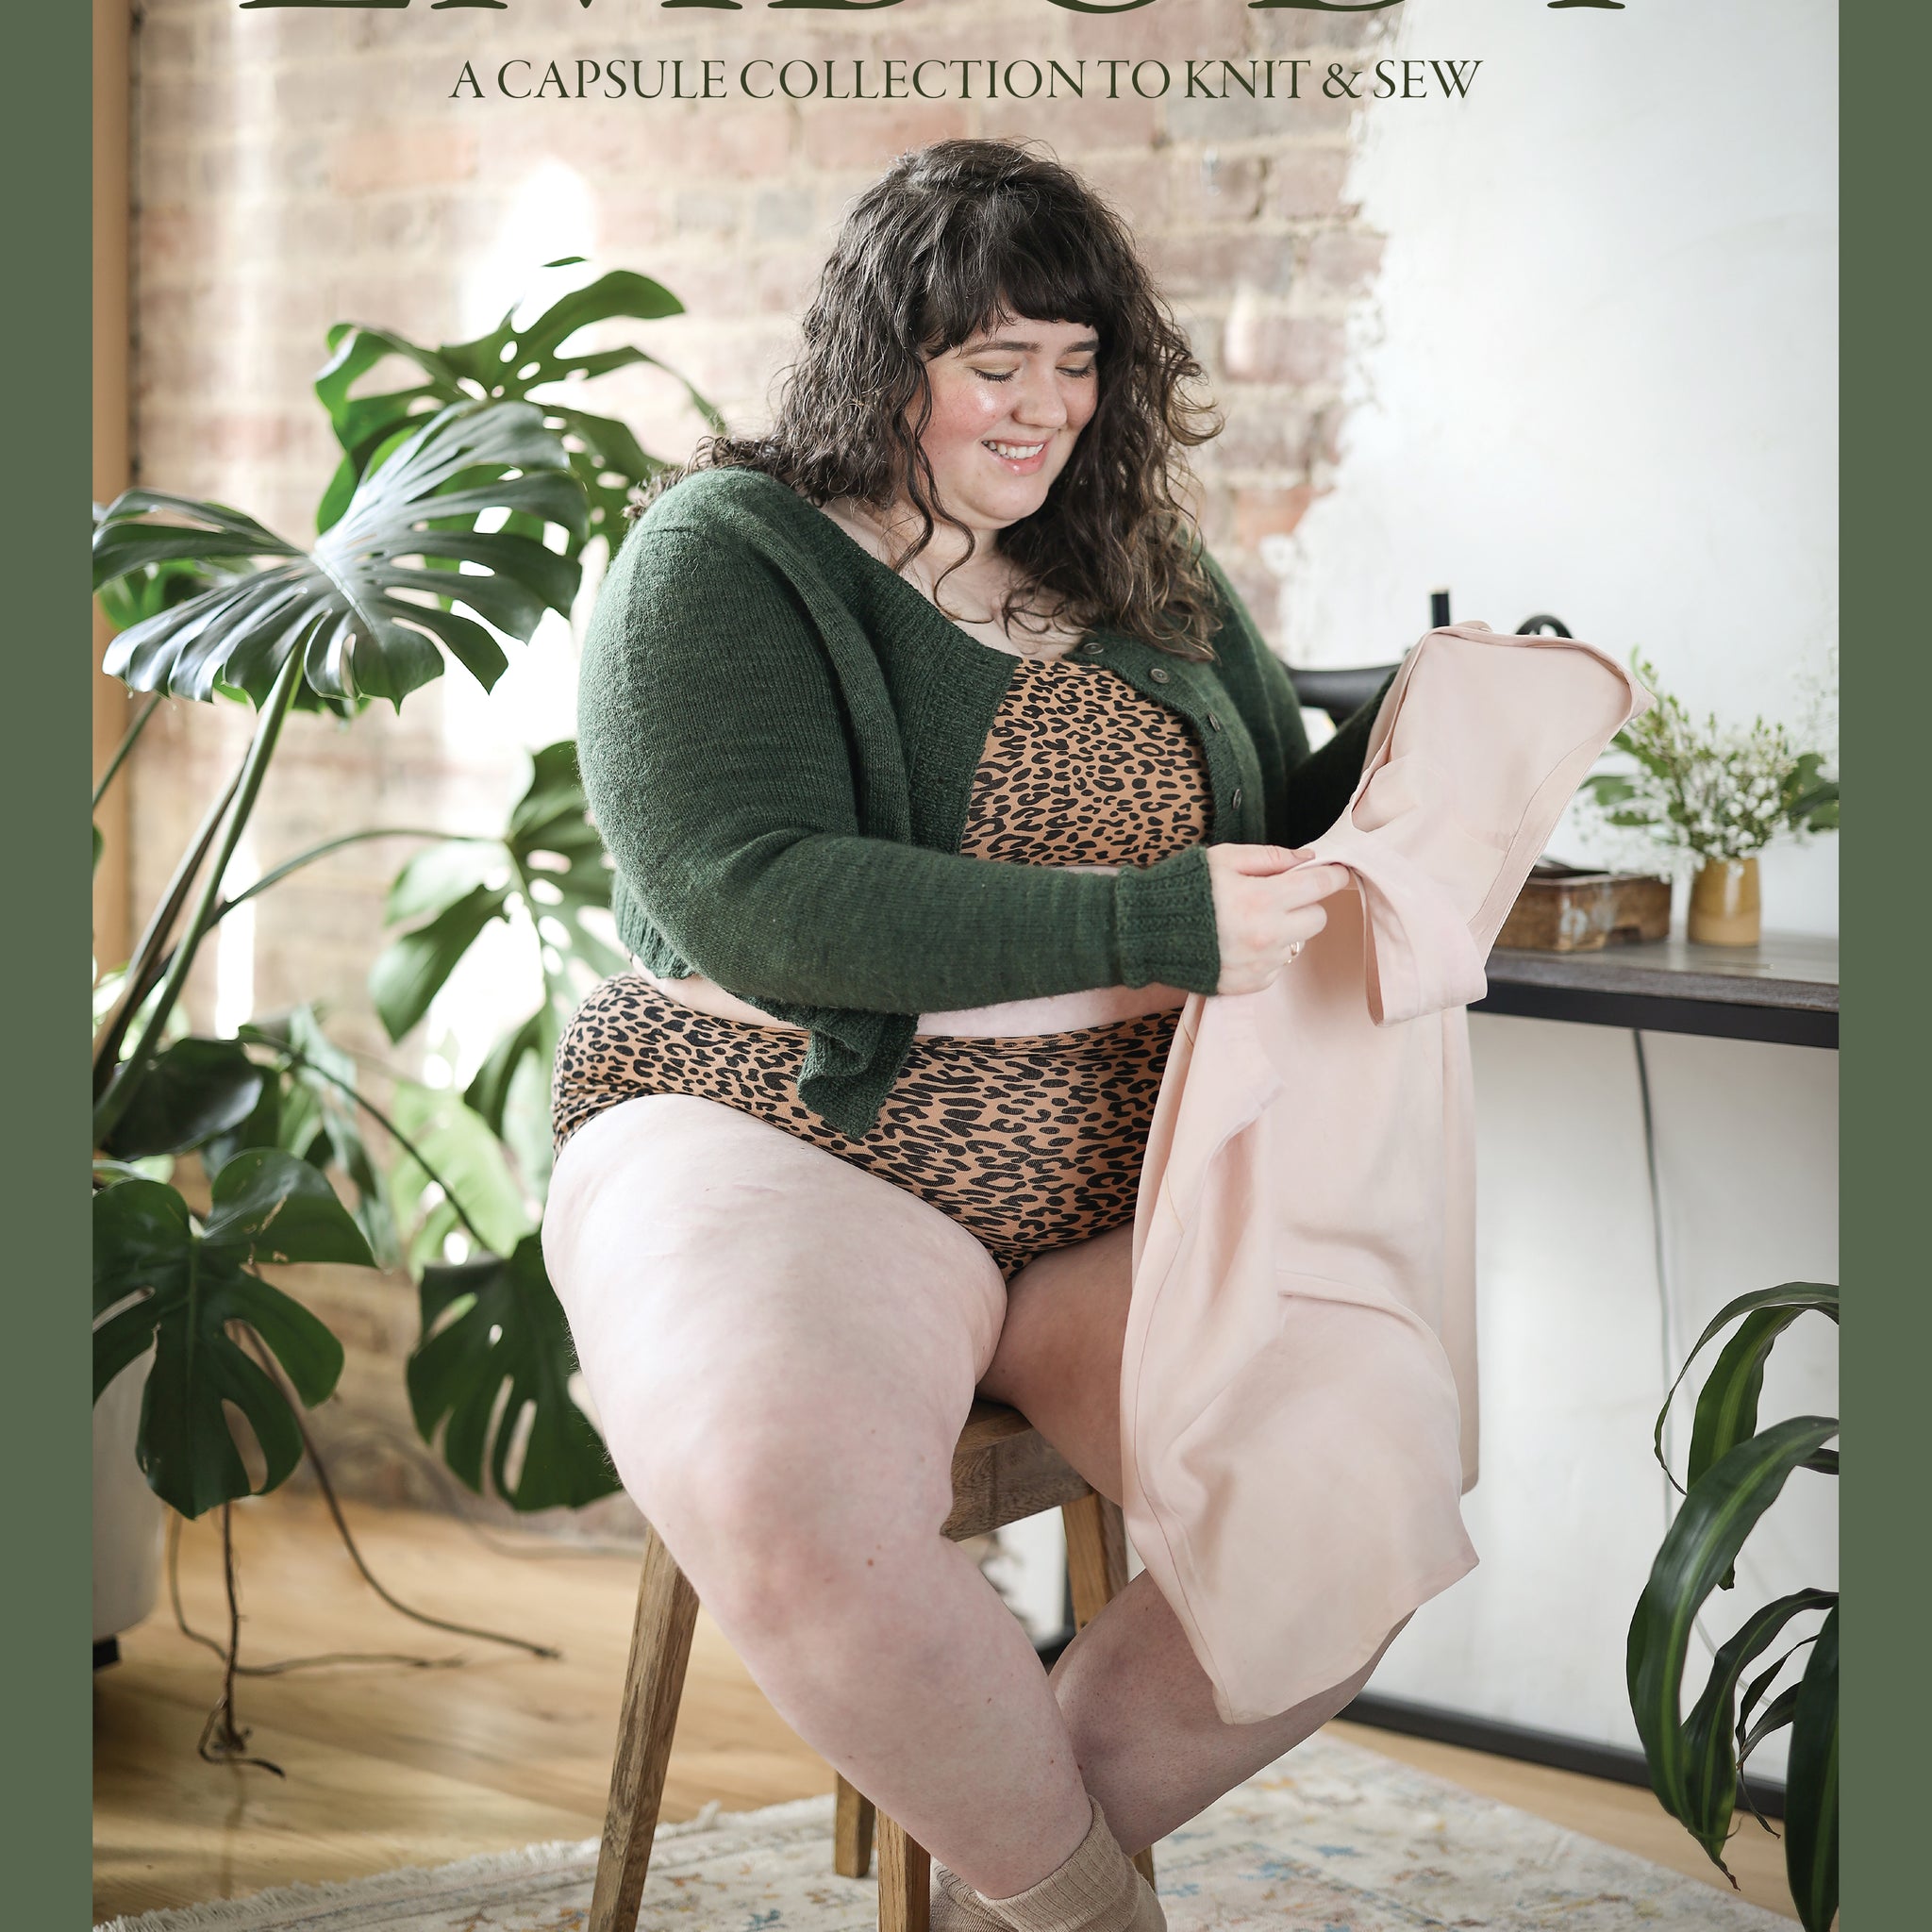 EMBODY - a capsule collection to knit and sew